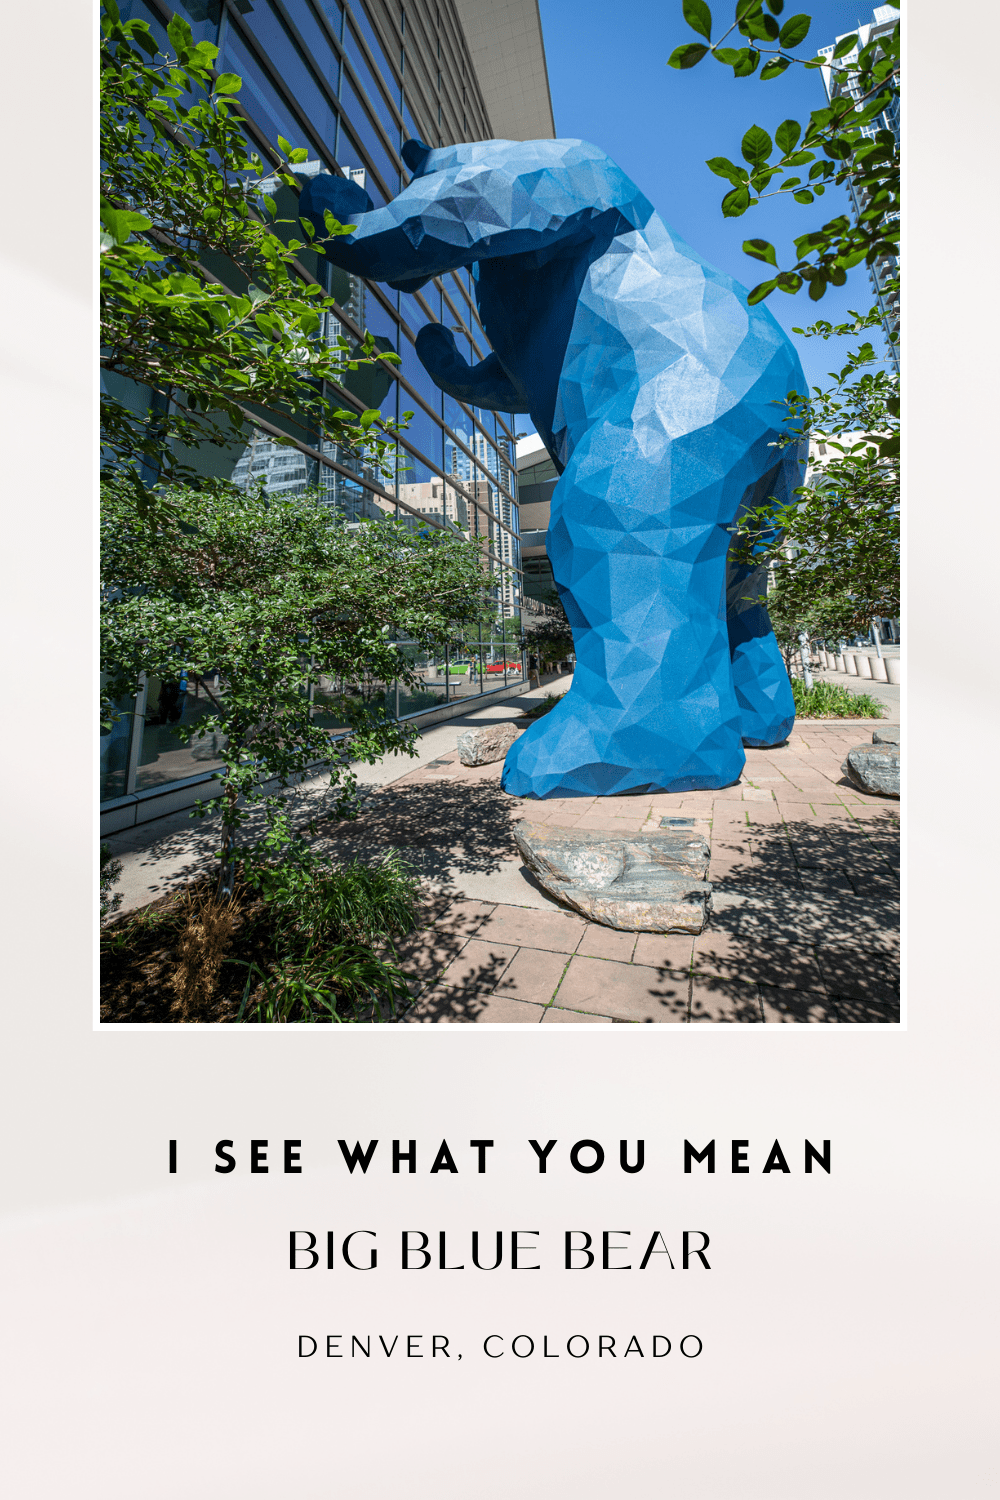 This Denver roadside attraction is so big, I can hardly bear it. And it definitely didn't leave me feeling blue. It's the Big Blue Bear in Denver, Colorado outside the Colorado Convention Center downtown. Otherwise known as, "I See What You Mean." VIsit this Denver roadside attraction on your Colorado road trip. #Colorado #ColoradoRoadTrip #ColoradoRoadsideAttraction #Denver #DenverRoadTrip #DenverRoadsideAttraction